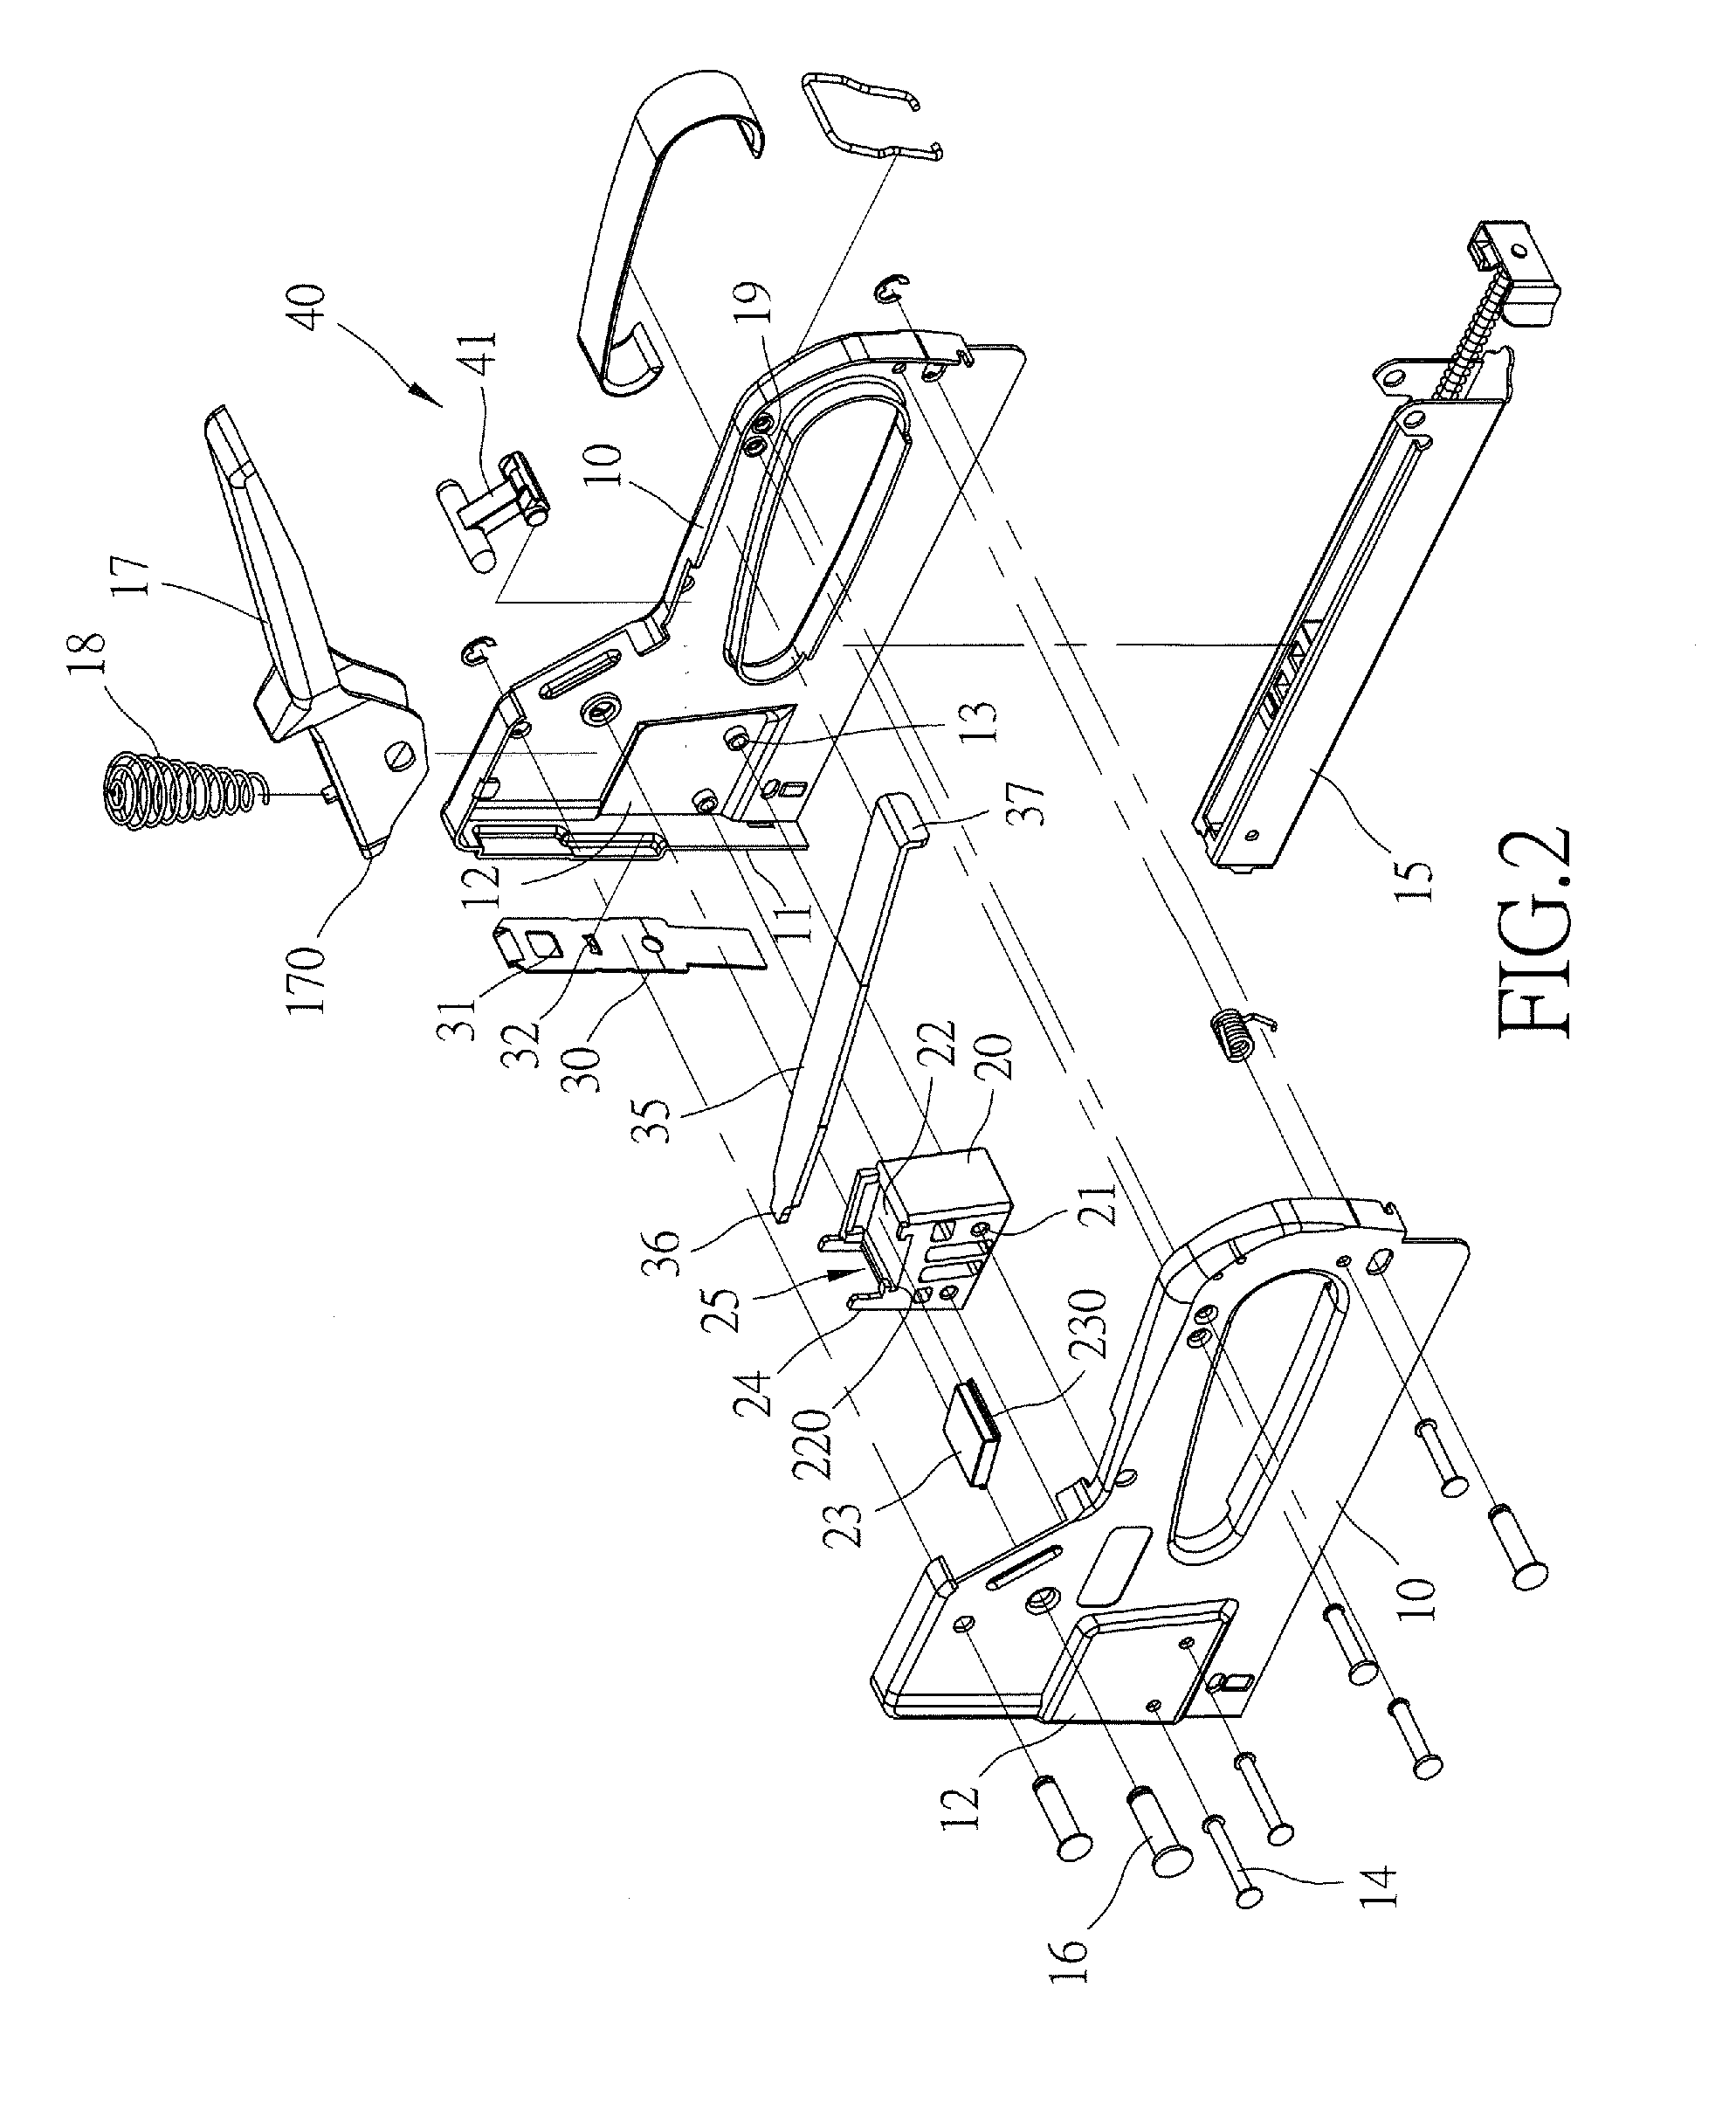 Structure of stapling device